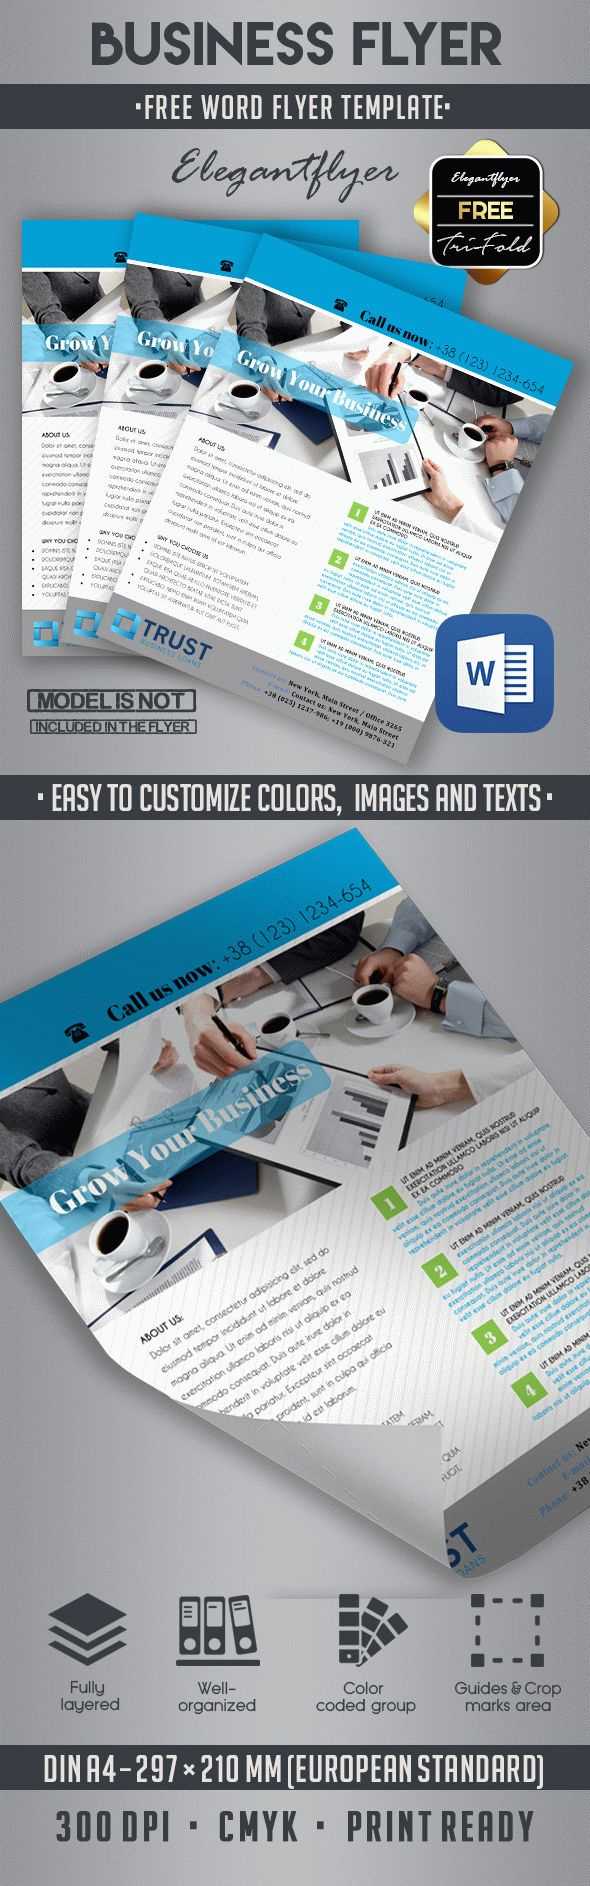 10 Best Business Flyer Templates In Word! |Elegantflyer Throughout Free Business Flyer Templates For Microsoft Word